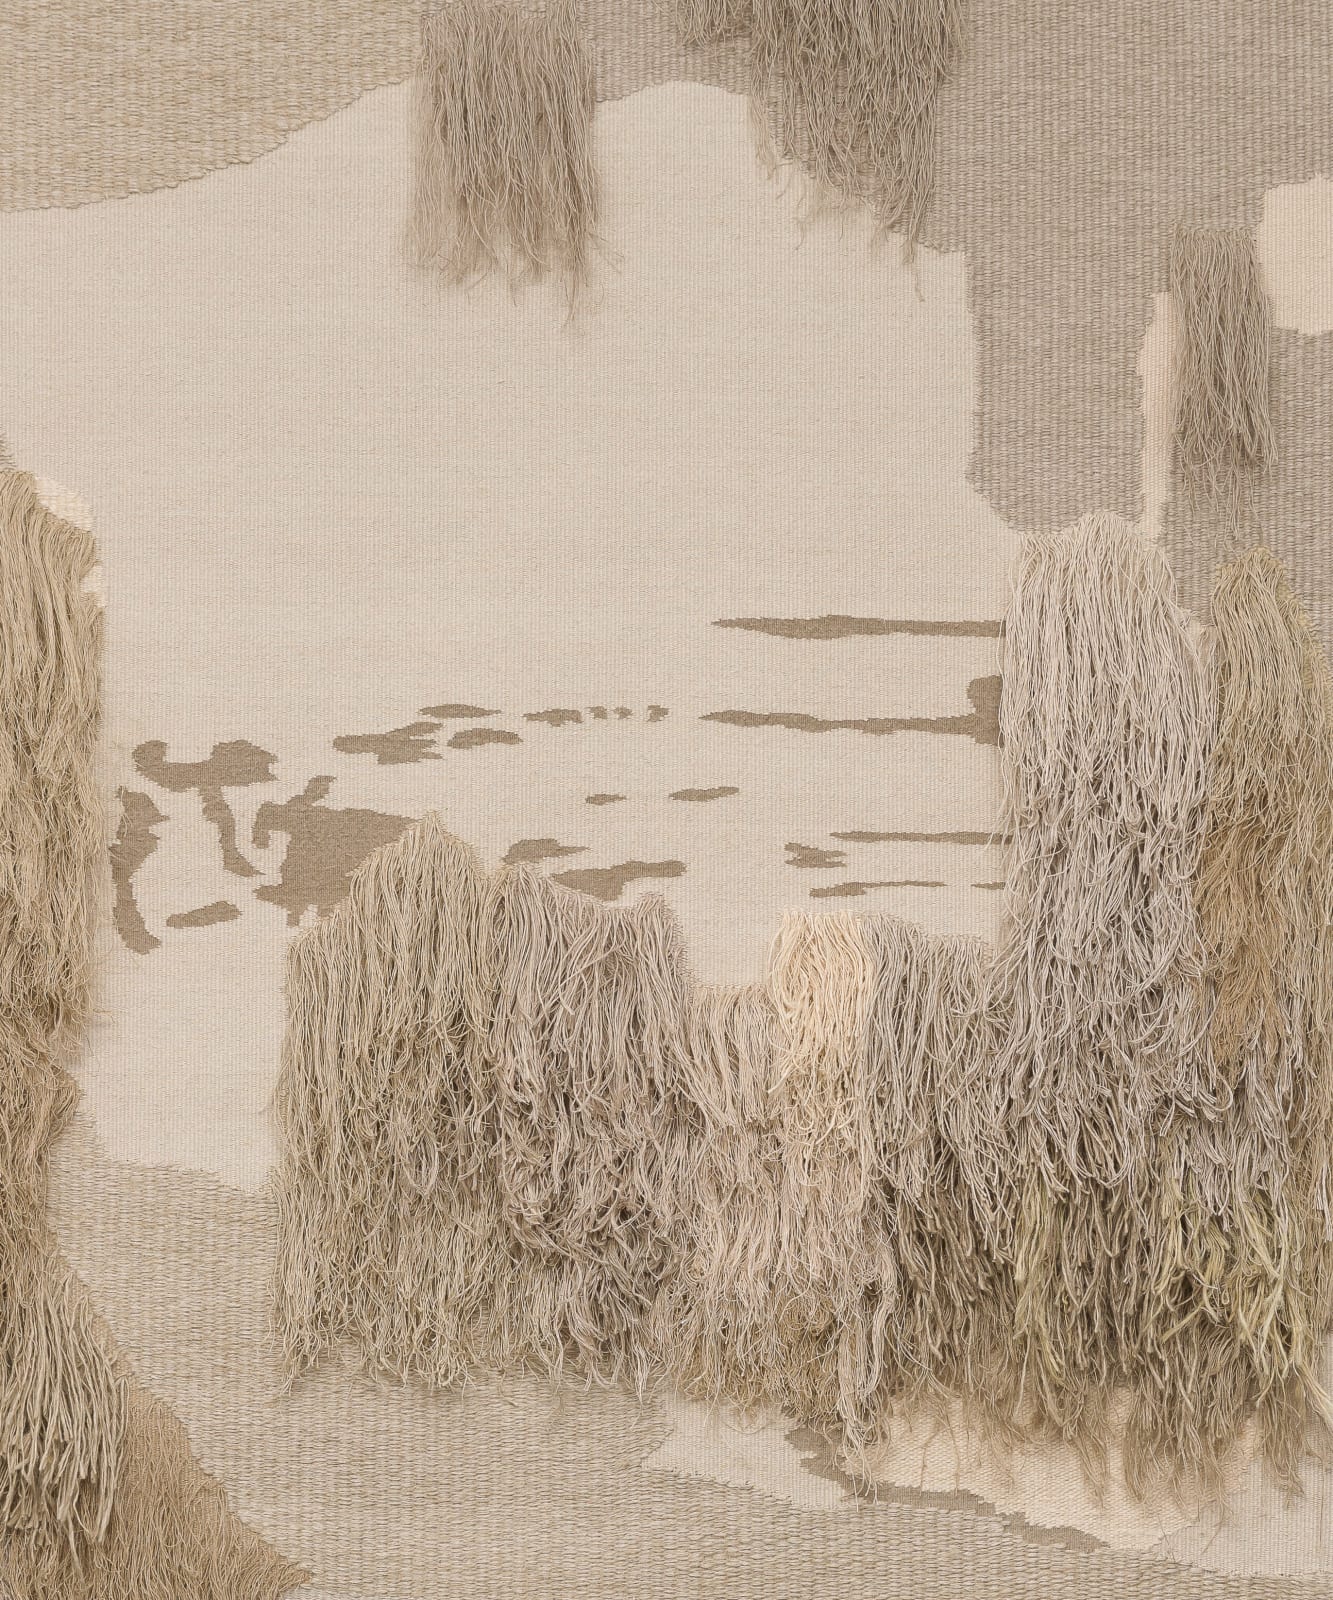 <p>Andreas Eriksson, <em>Weissensee No. 12</em>, 2018 - 2019. Detail.</p><h3>"Territories of the finished tapestries might be distinguished by a particular knotted texture or the stands of long fibre sprouting from the surface. Andreas has described the tapestries as ‘existential landscapes’. We might also see them as a conceptual extension of painting in which the picture migrates to the canvas itself." </h3><p><strong>- Hettie Judah on Andreas Eriksson, 2020</strong></p>